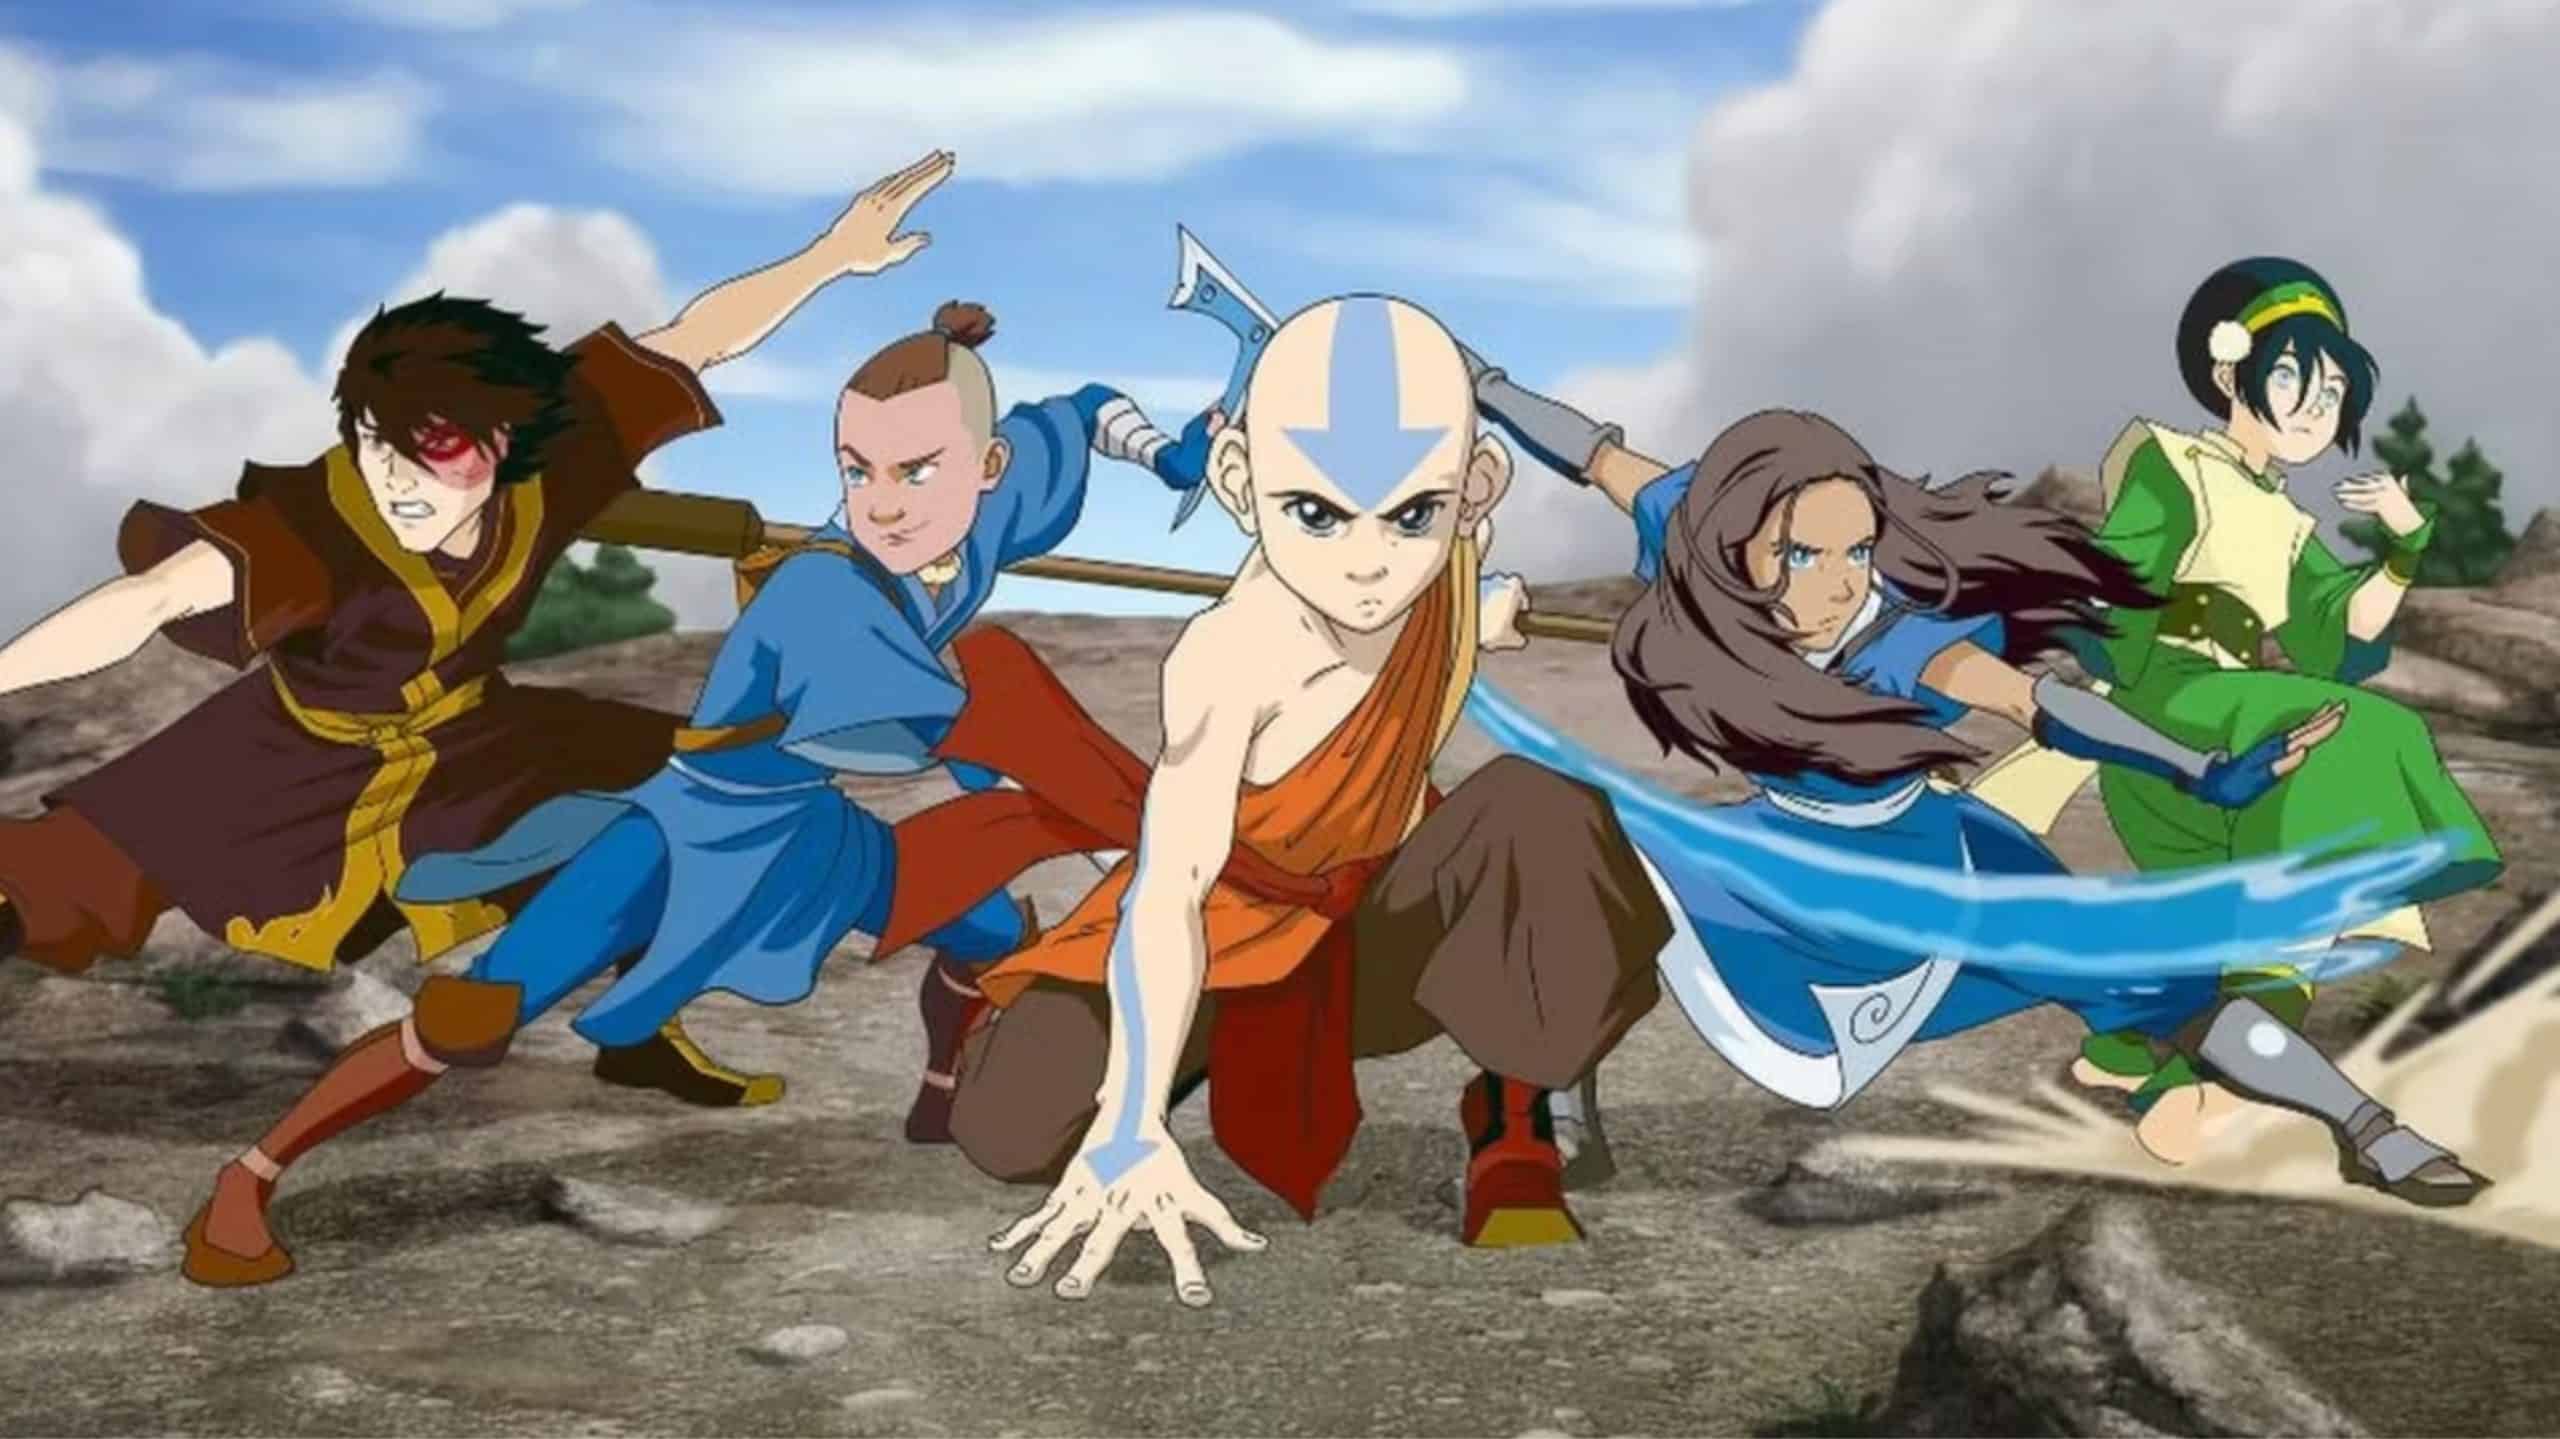 Aang Visits The Northern Air Temple, Full Scene